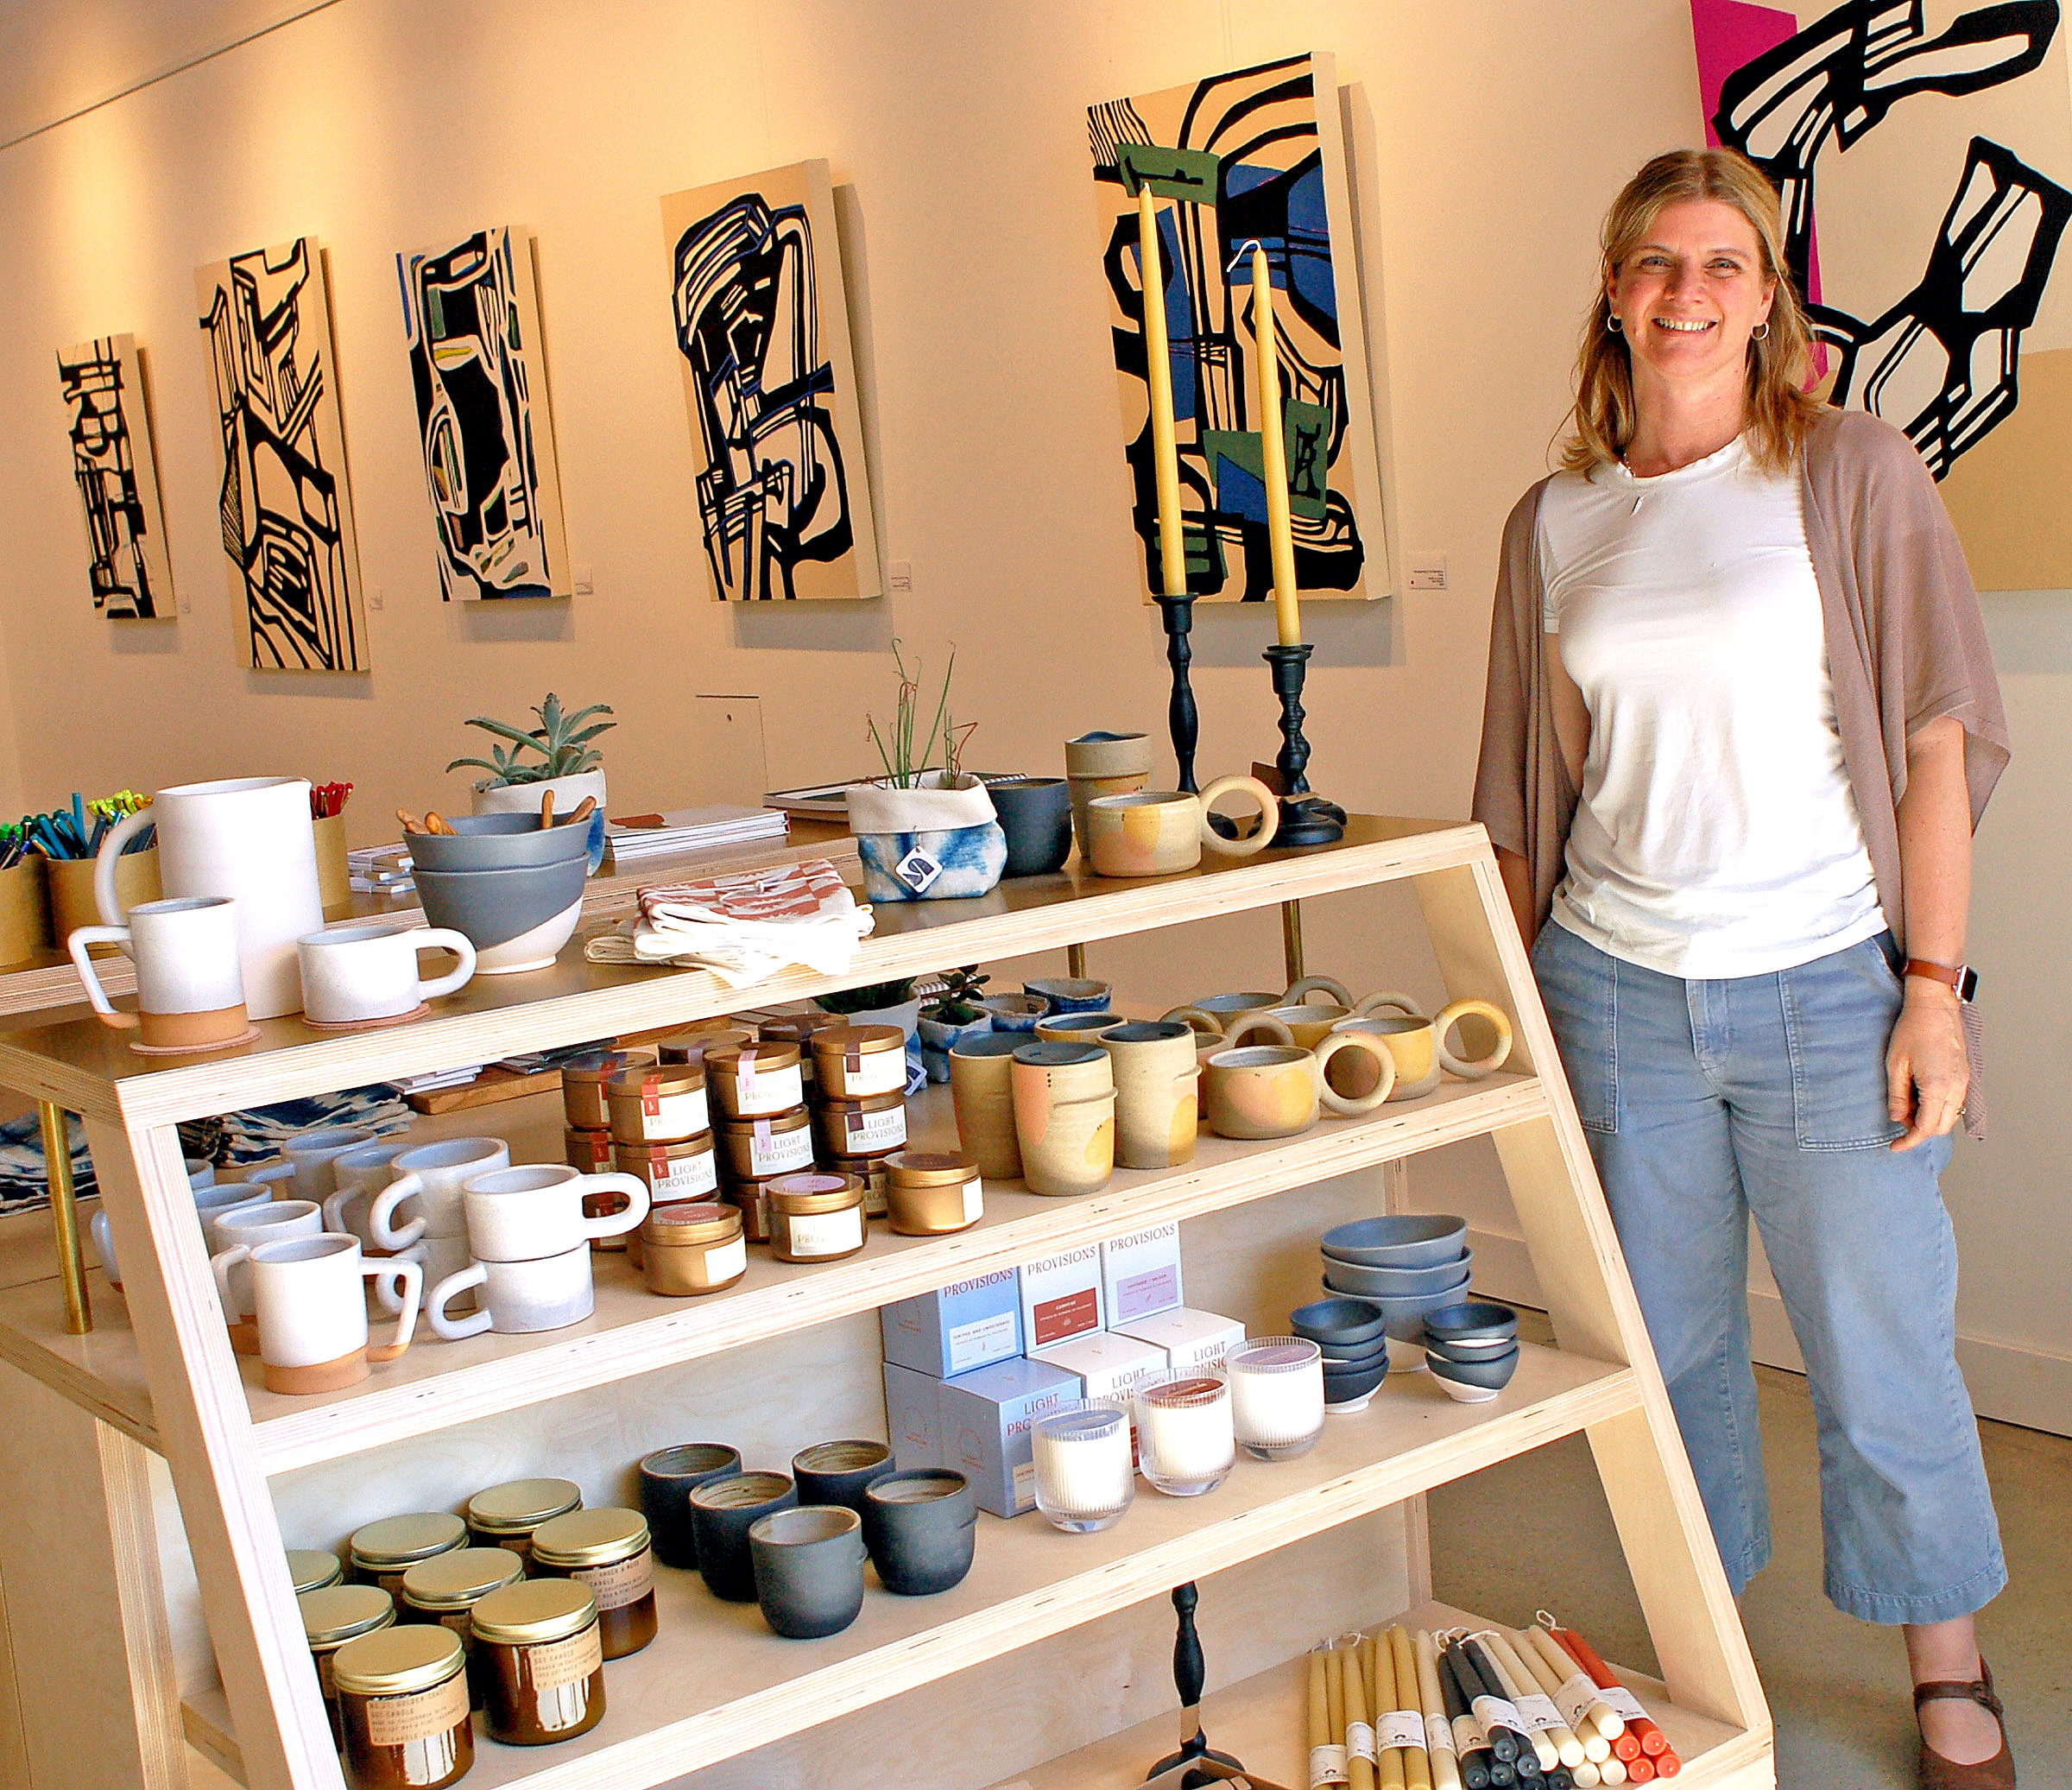 Photo by Larry Ferguson. Valerie Lloyd, owner of Surface Gallery, opened the business in Old Colorado City this summer.